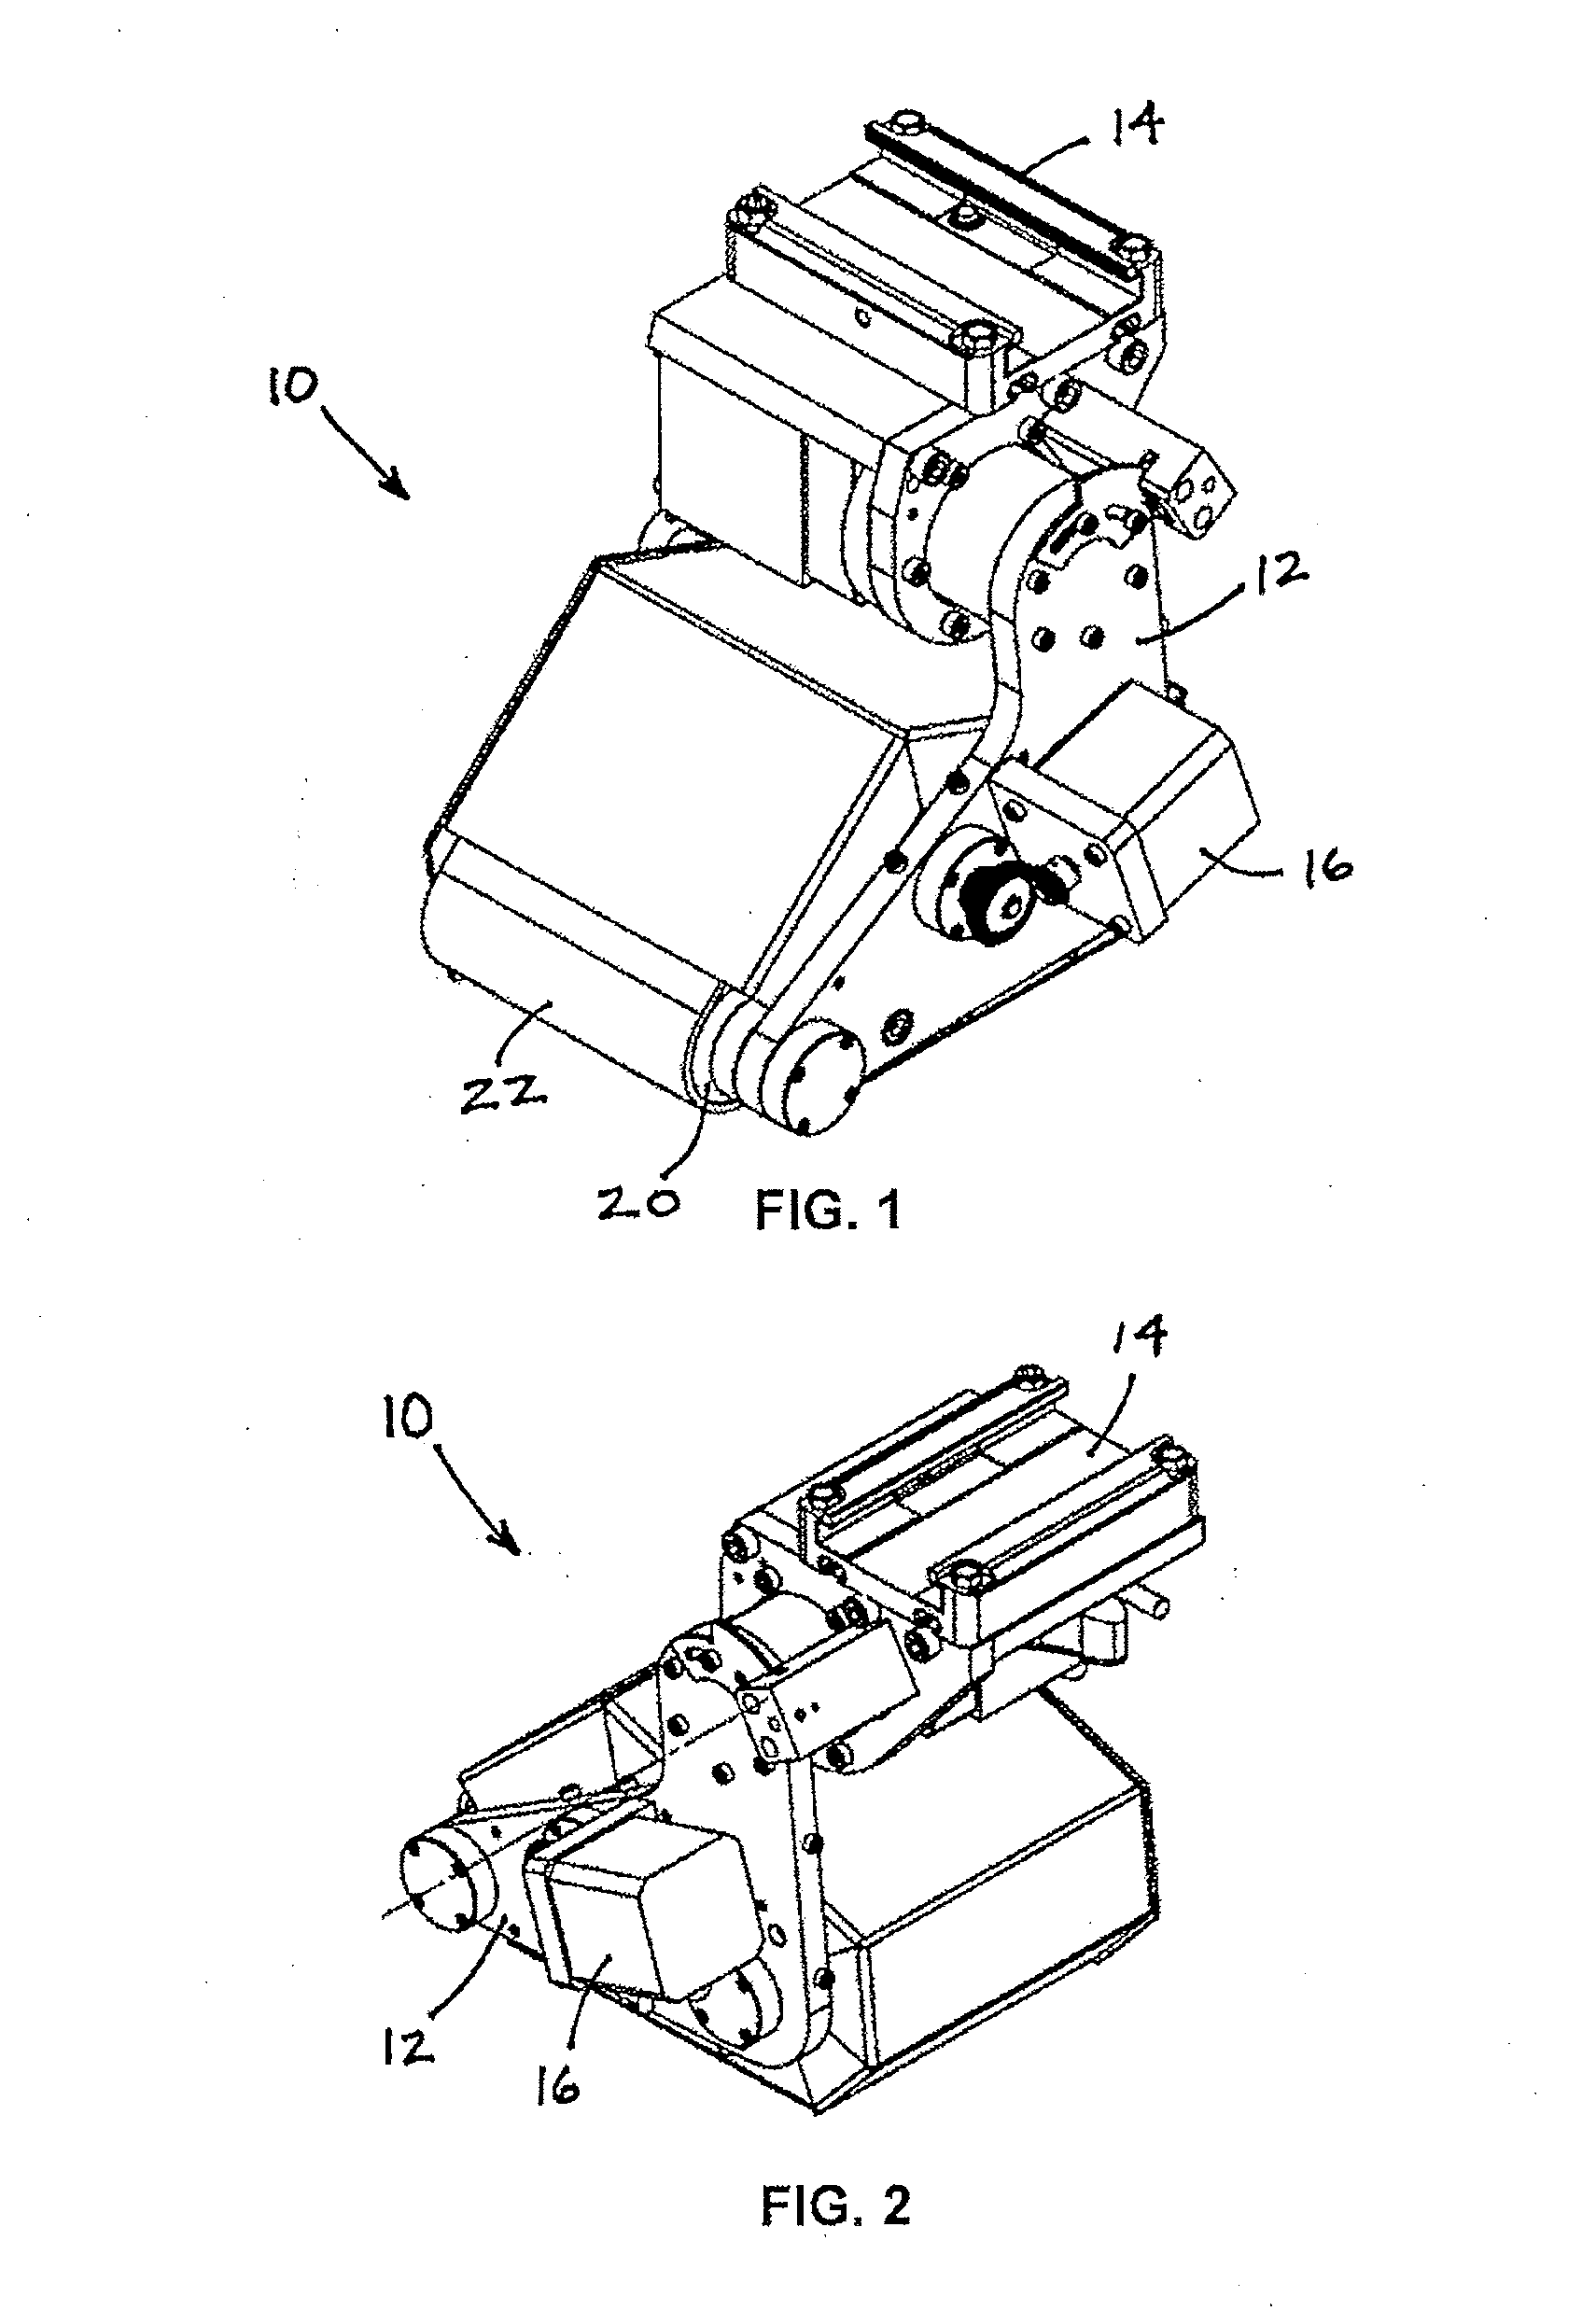 Apparatus, assembly and method for dry cleaning a flexographic printing plate carried on a plate cylinder that includes optimized cleaning functionalities